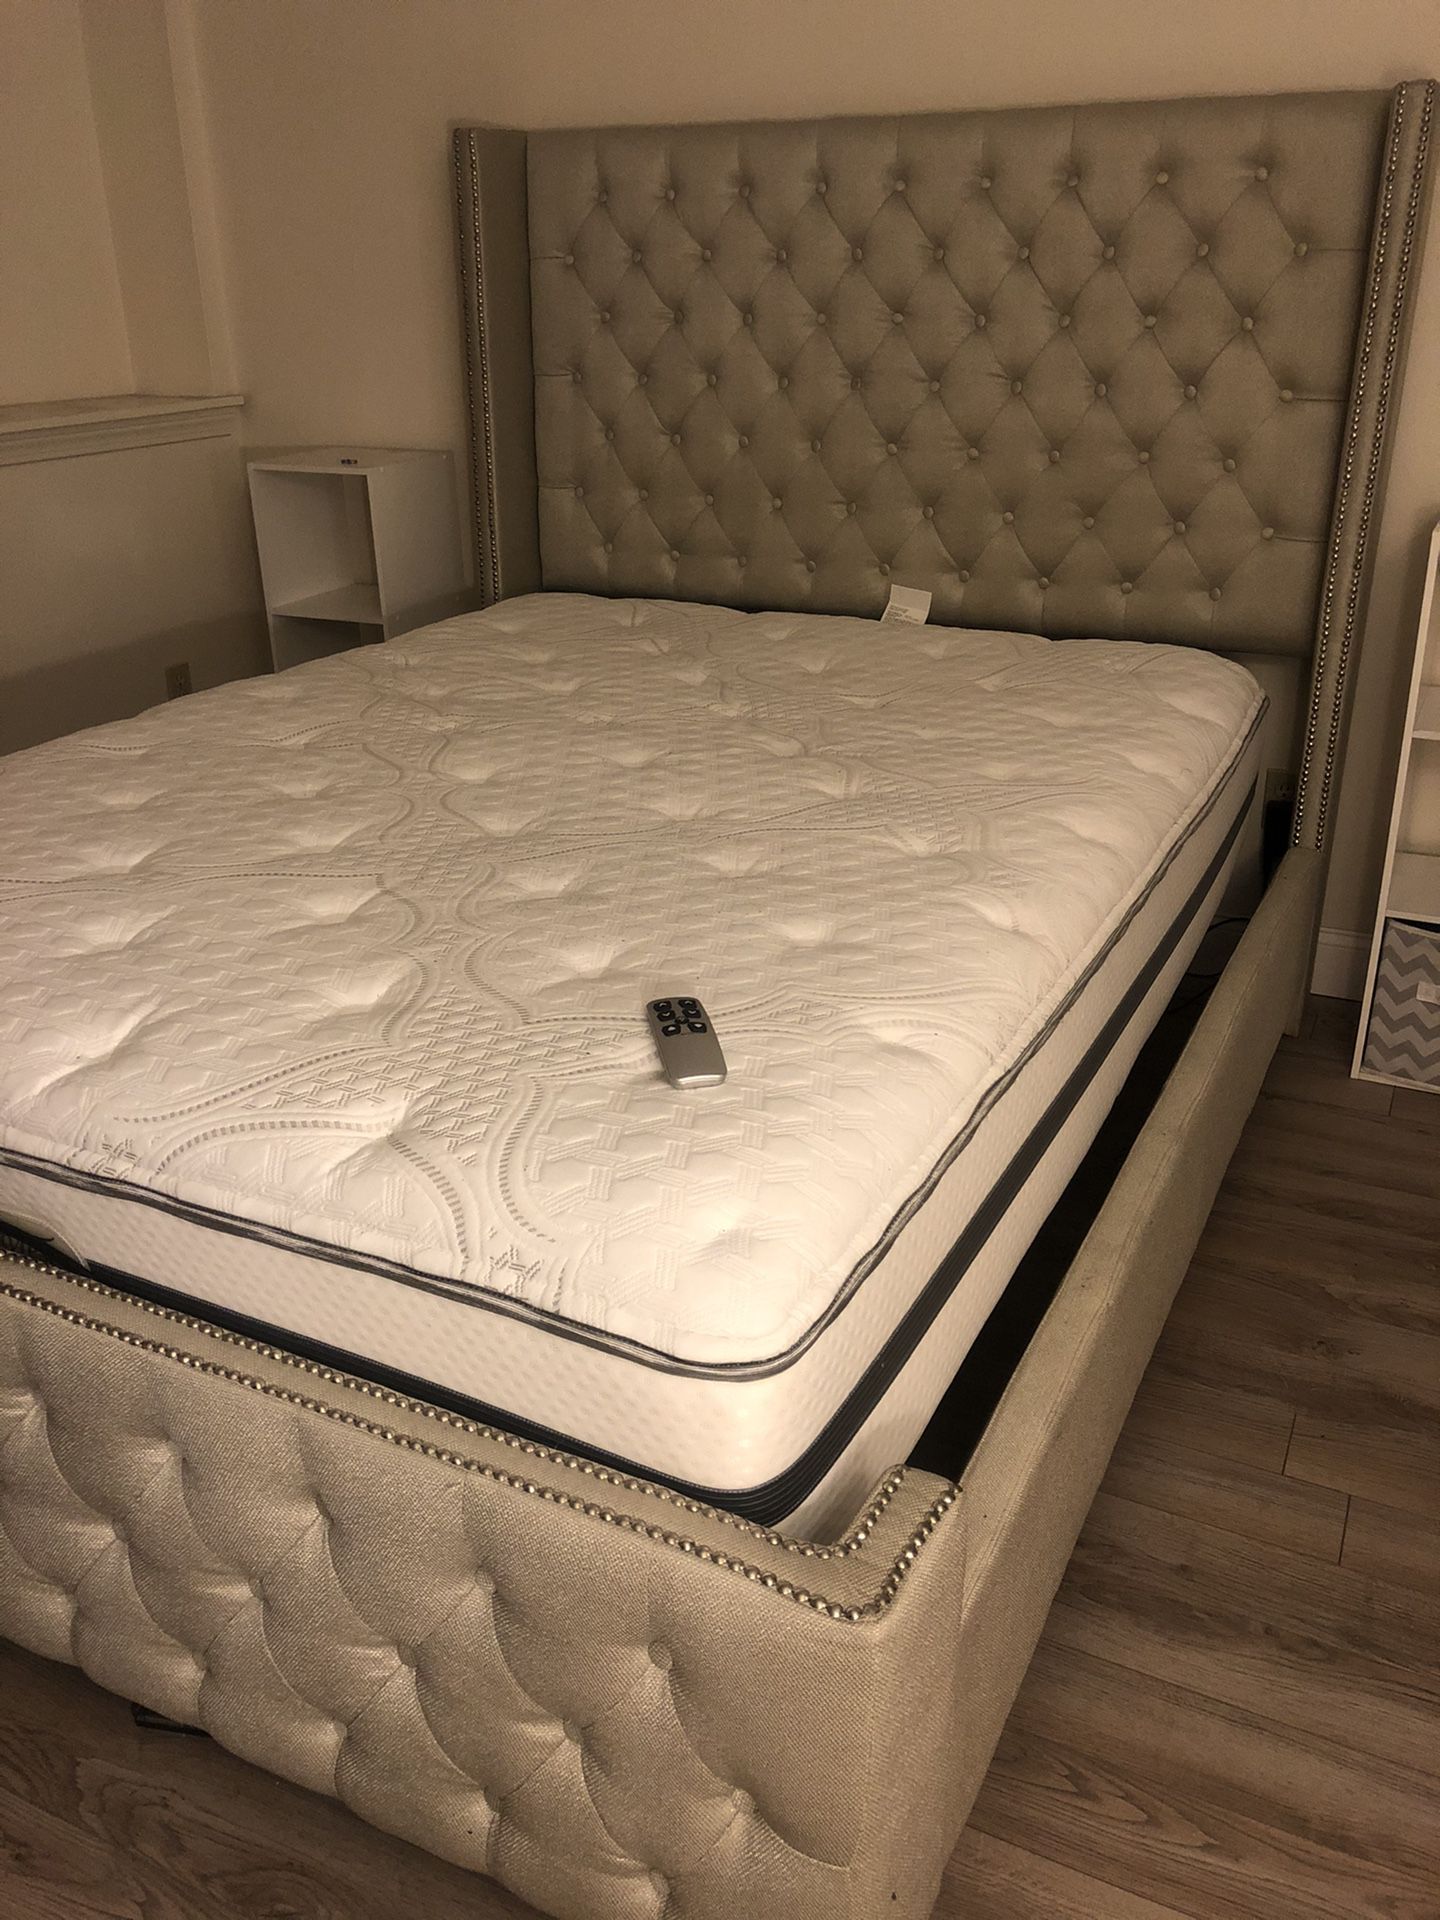 Queen Bed Frame including Queen Mattress AND Queen Adjustable Base w/ Remote (PICK UP ONLY) (PLEASE READ ENTIRE DESCRIPTION THOROUGHLY)